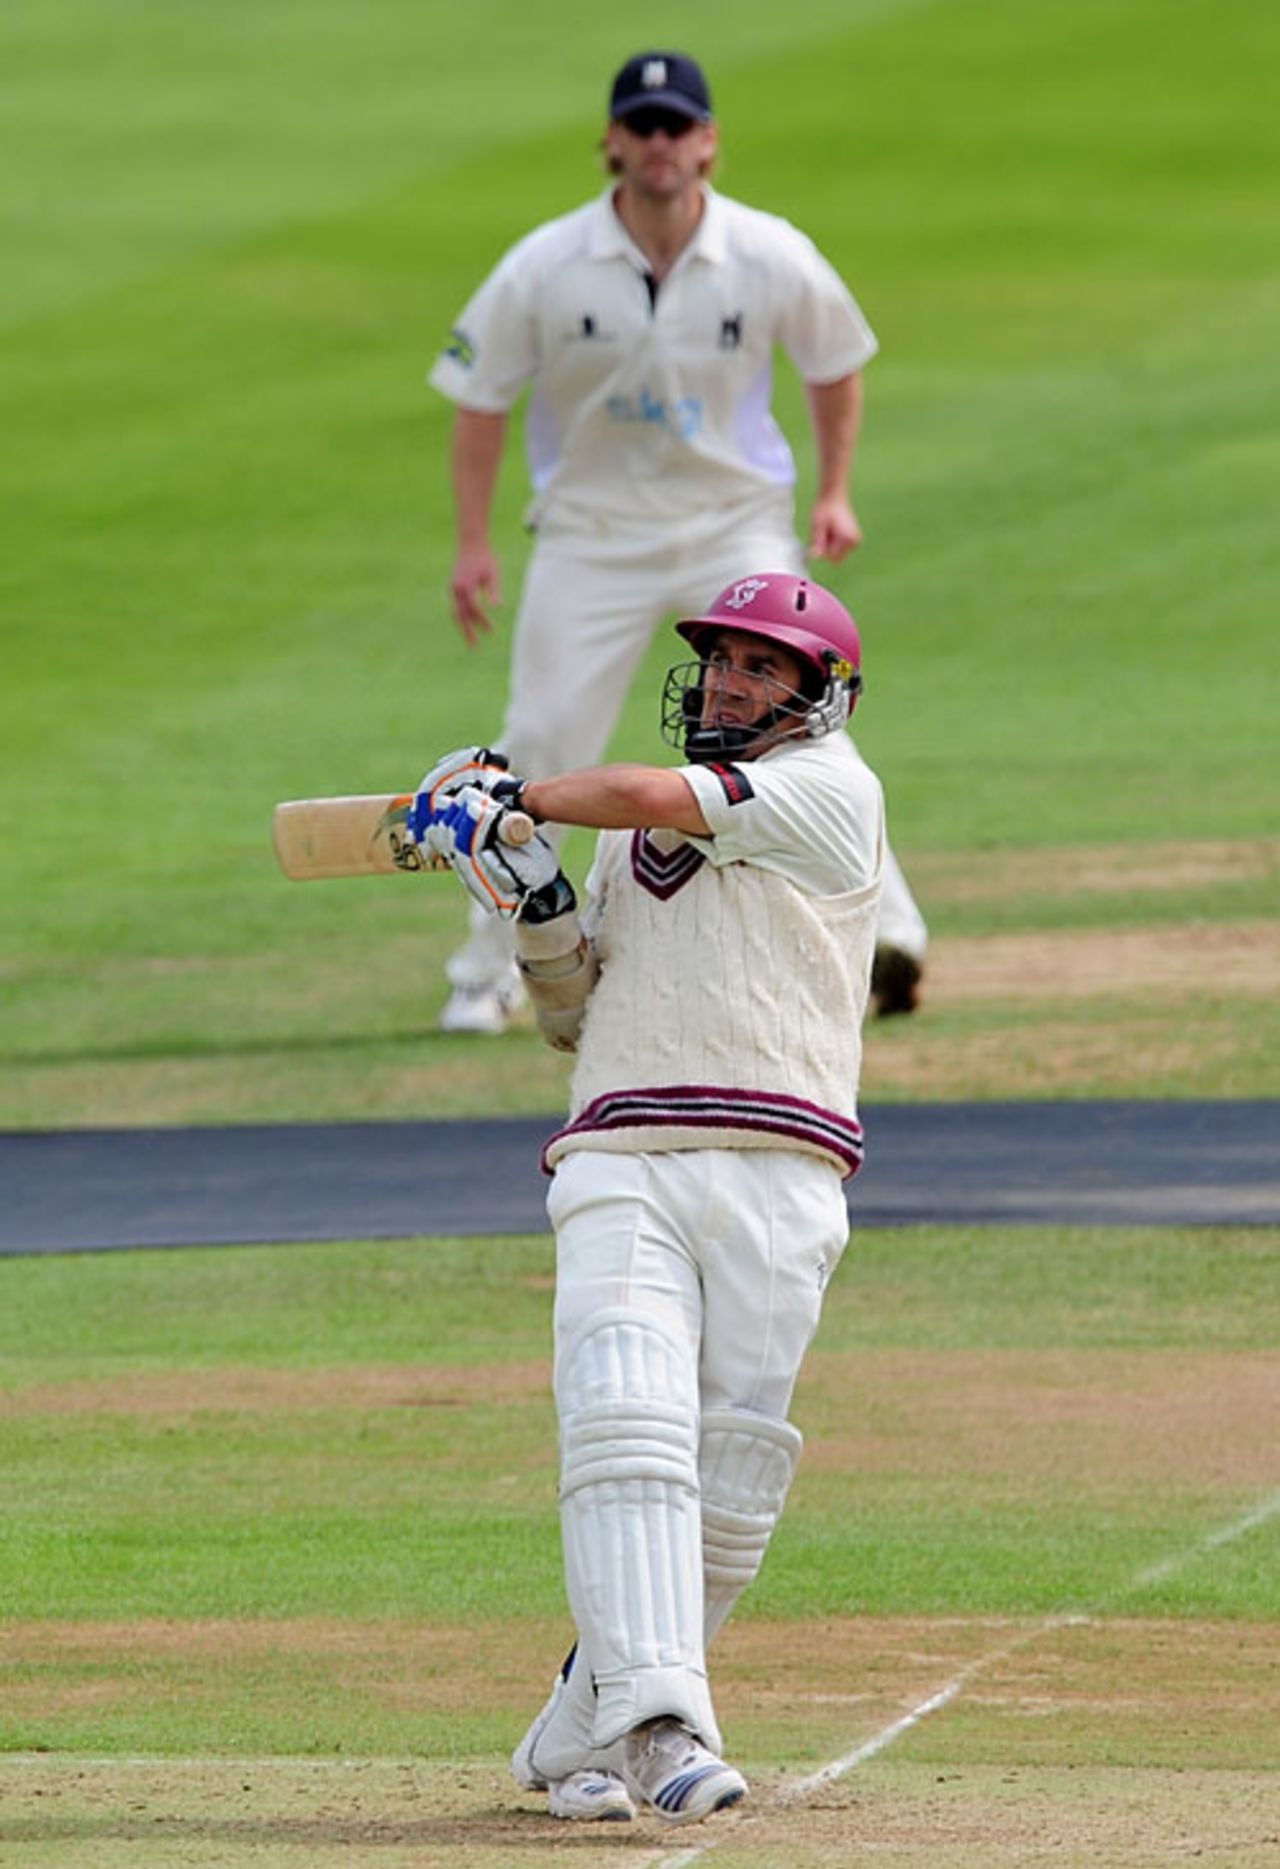 Justin Langer powers one to the boundary, Warwickshire v Somerset, County Championship Division One, Edgbaston, August 6, 2009